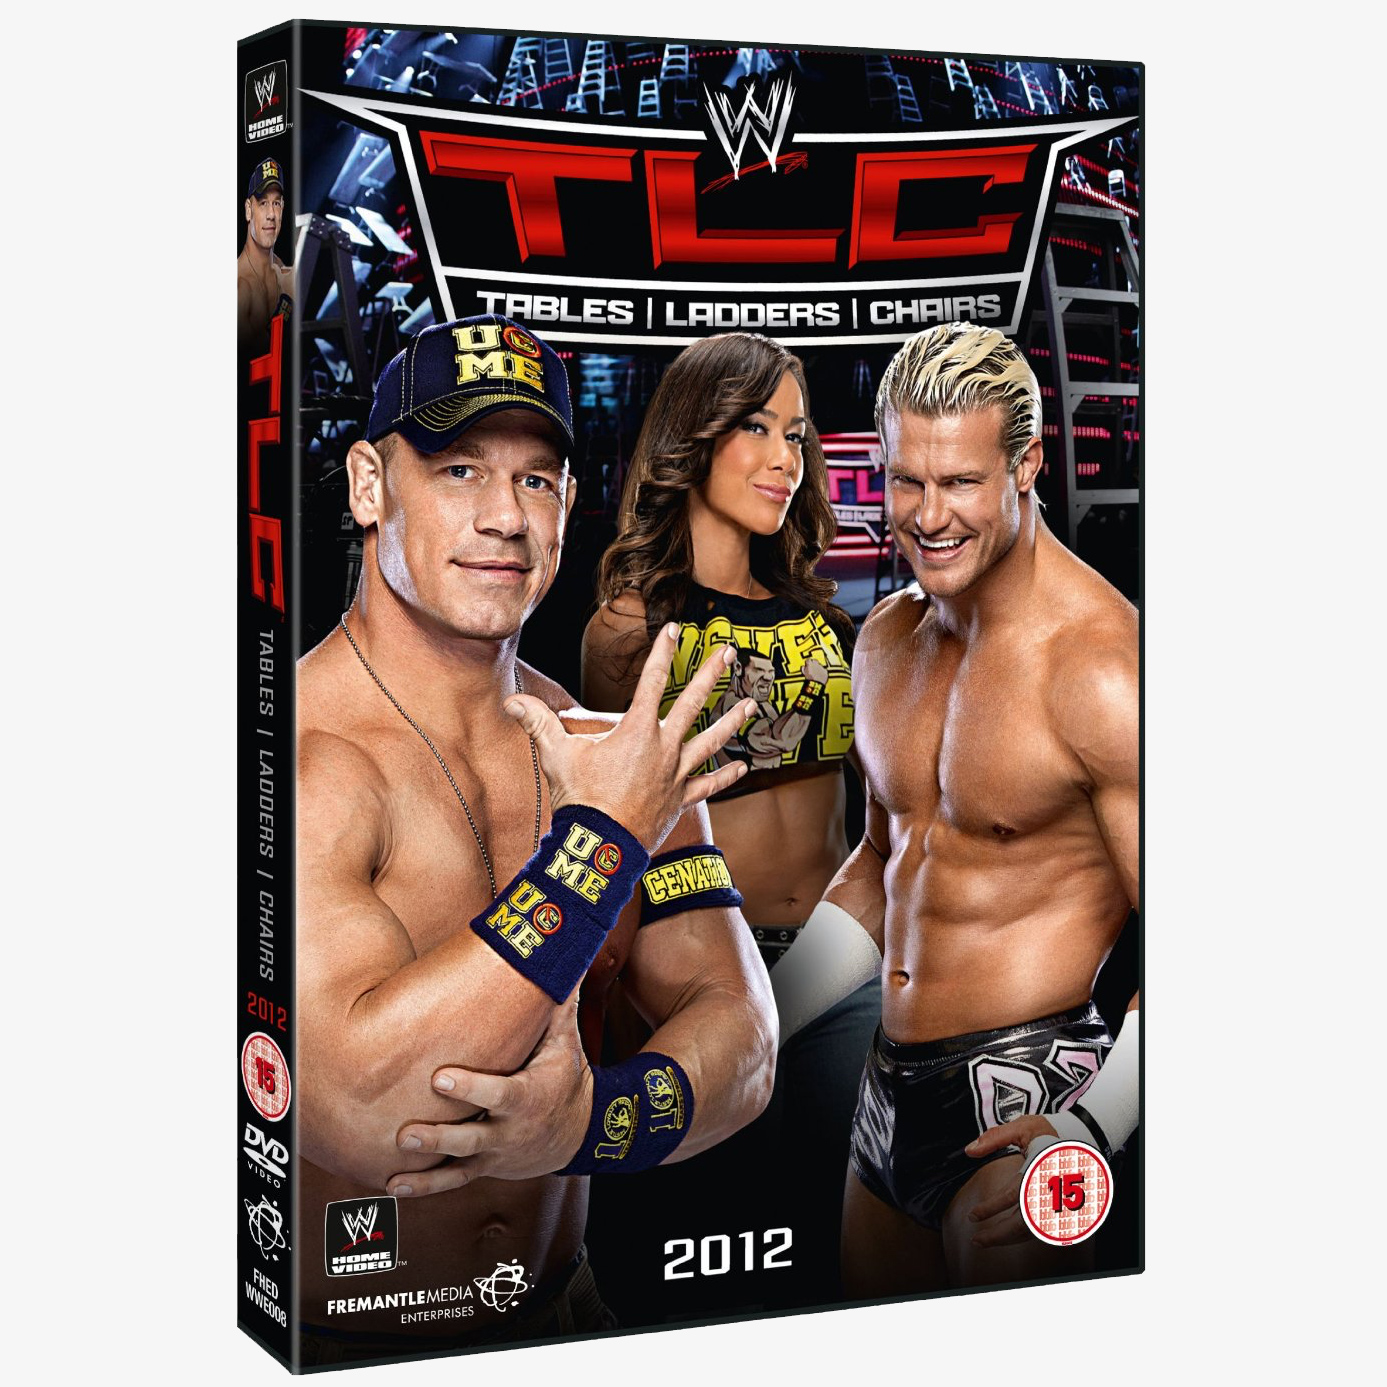 Amazing WWE TLC: Tables Ladders & Chairs 2012 Pictures & Backgrounds